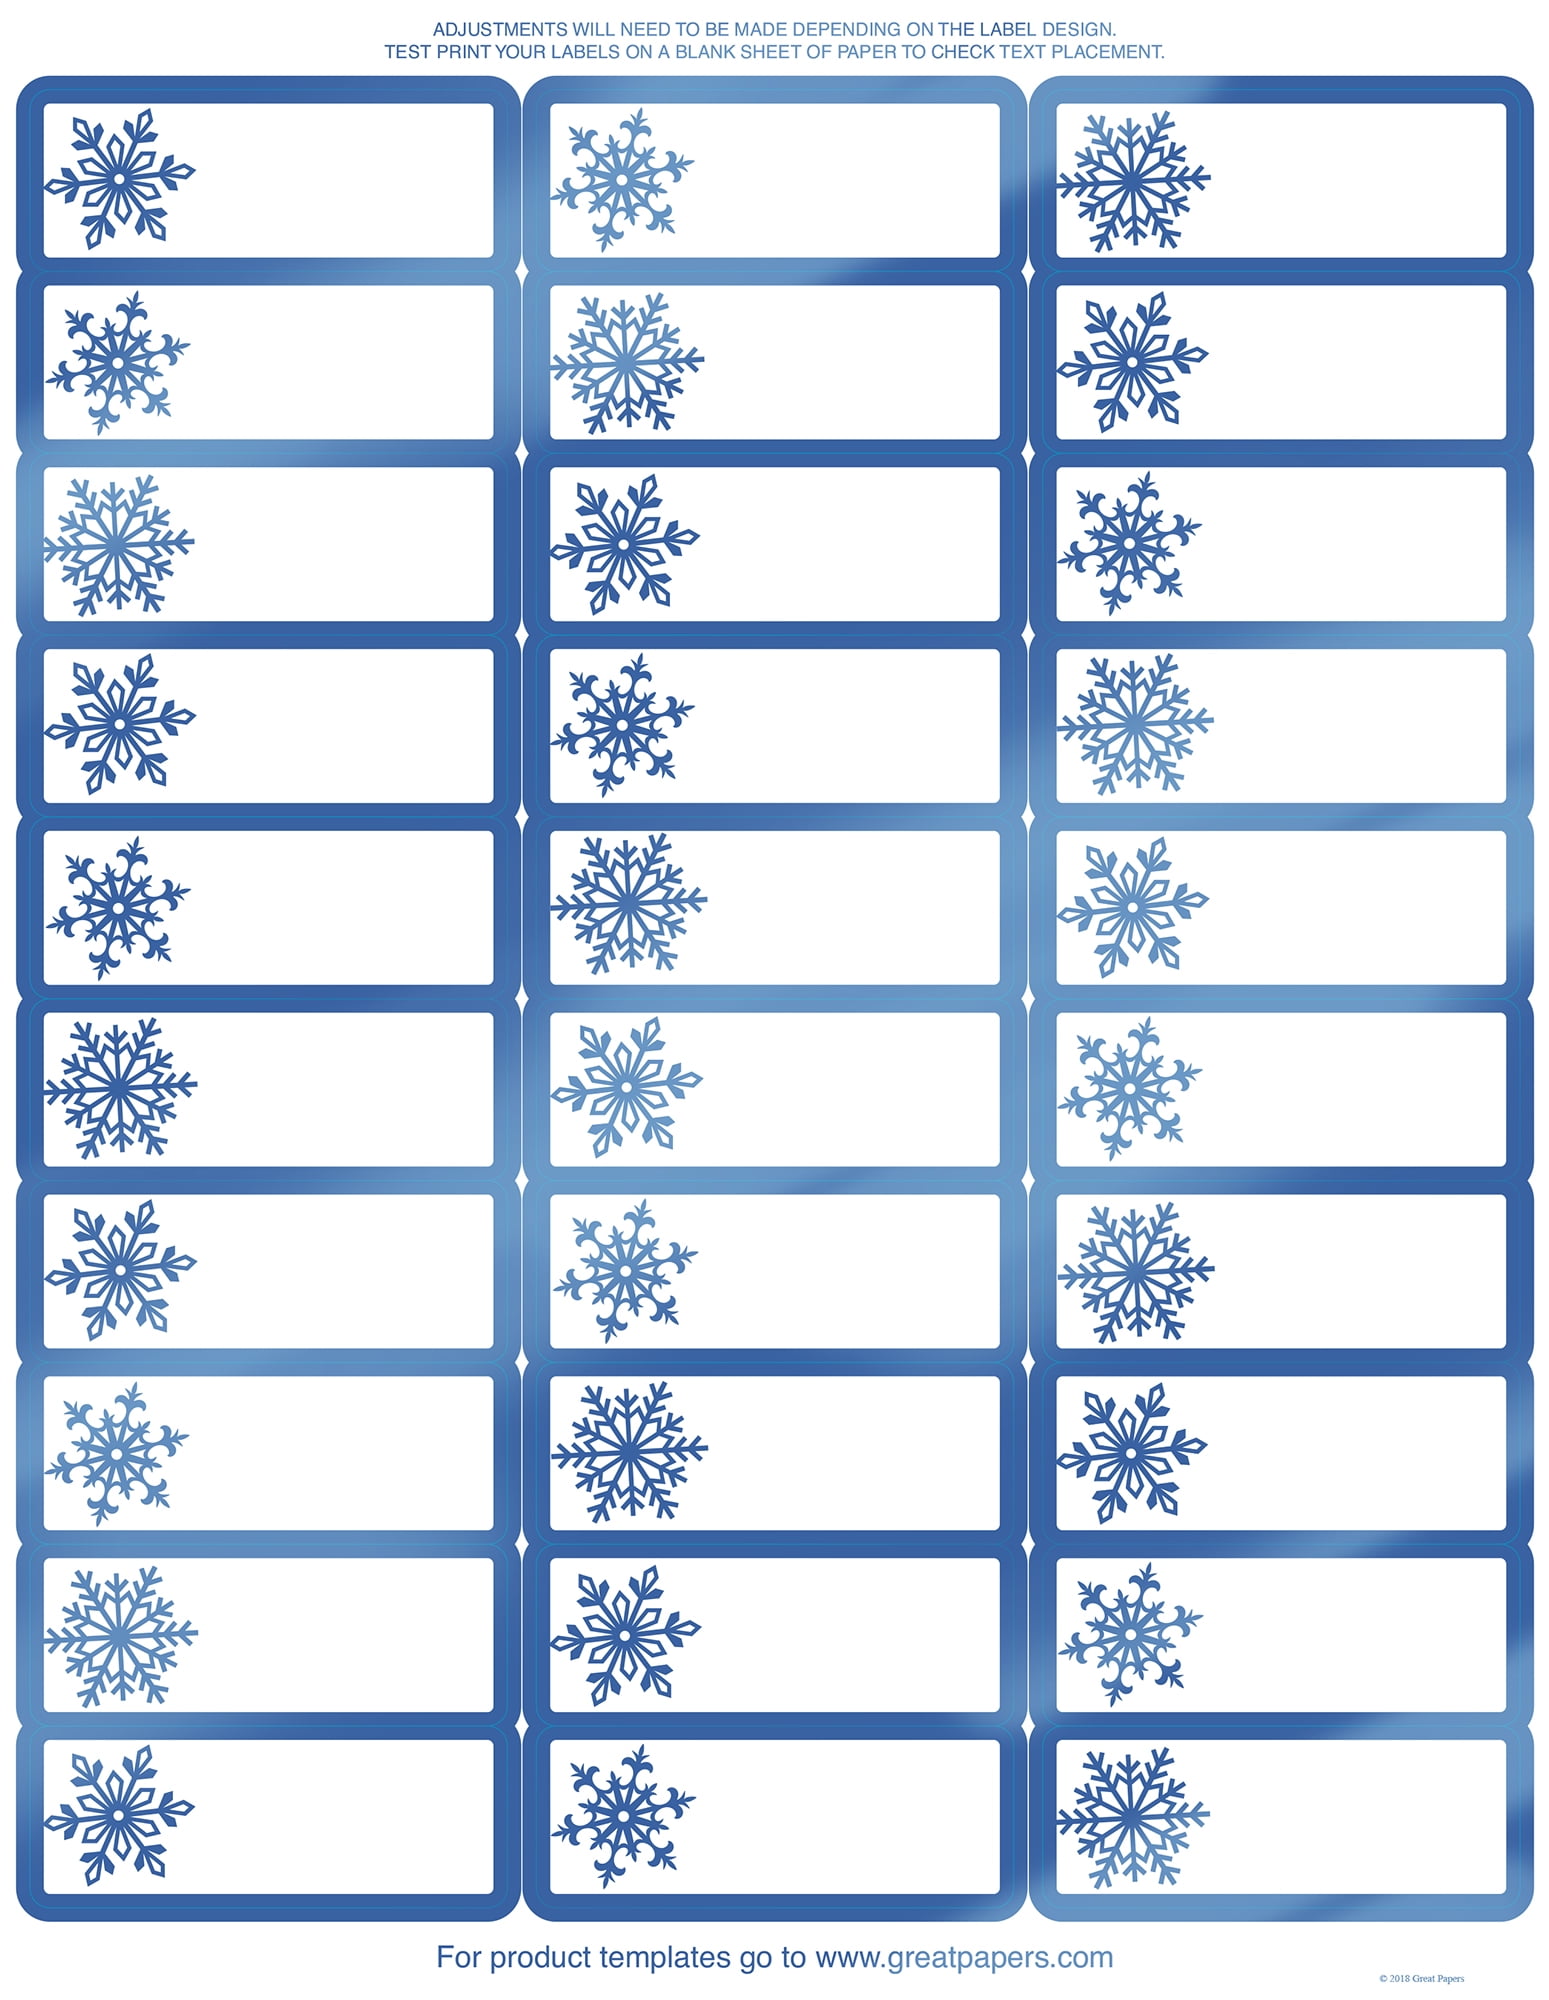 great-papers-blue-foil-snowflake-30-up-address-label-8-5-x-11-4